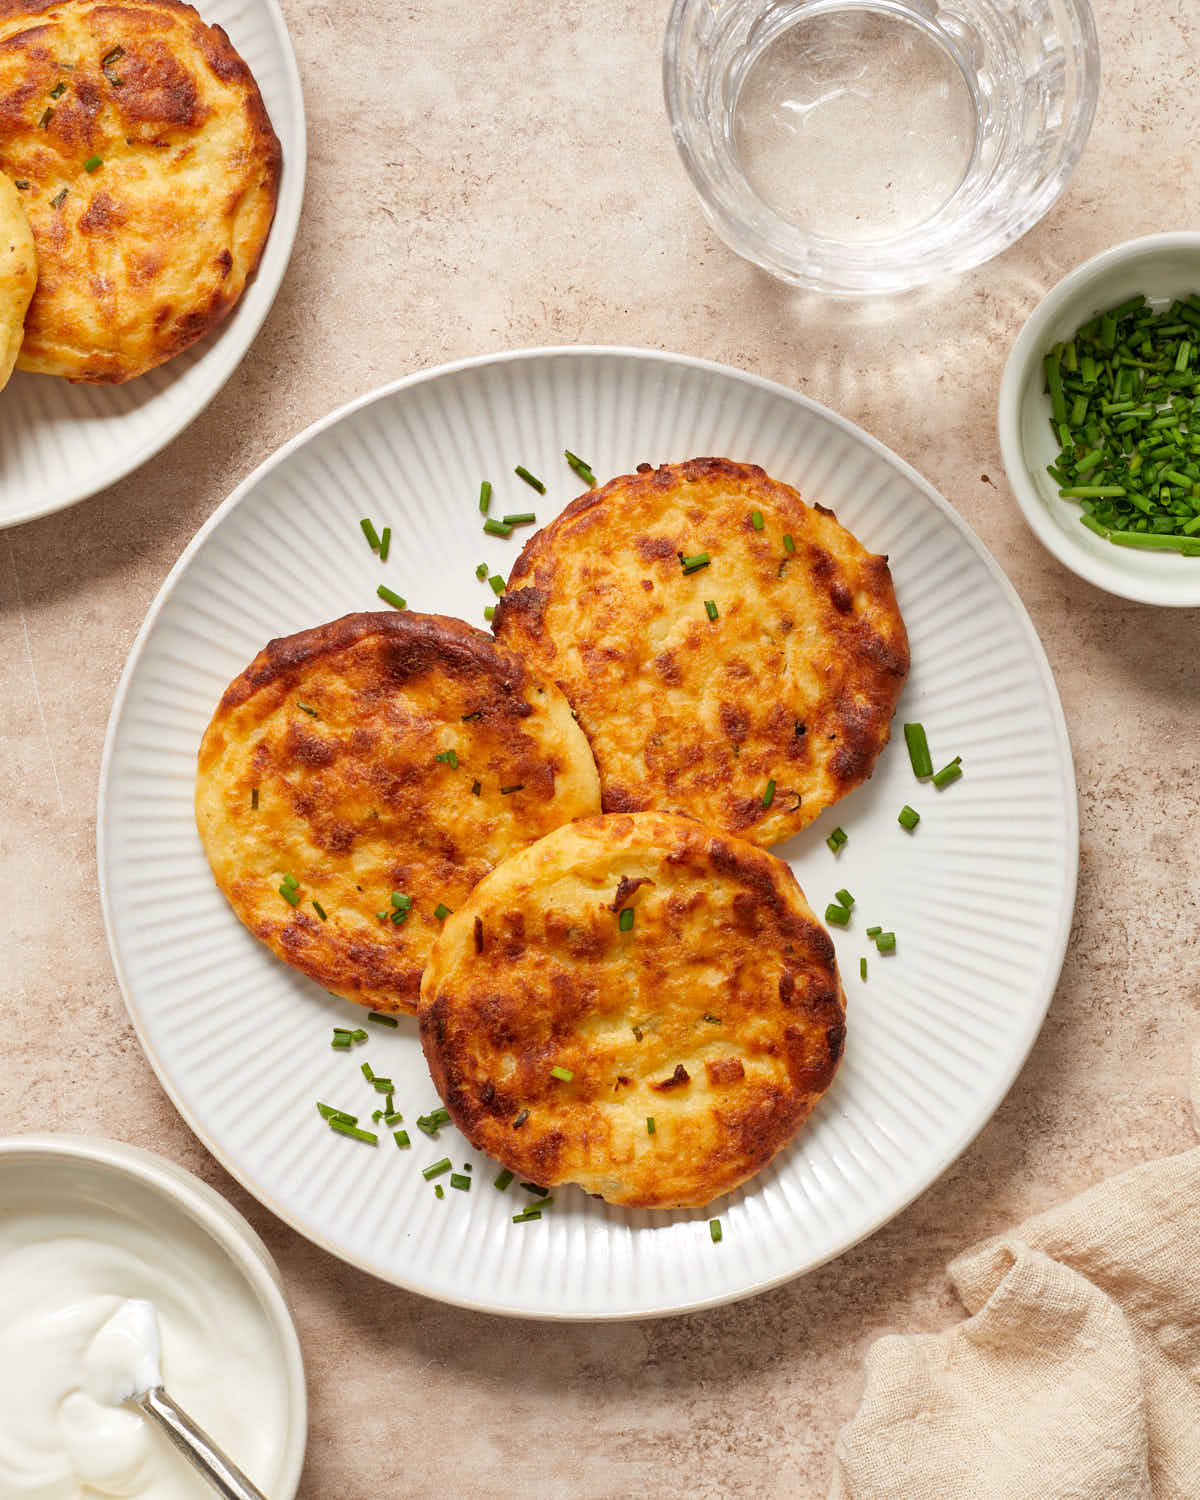 Three potato cakes on a plate next to some sour cream, chives and a glass of water.